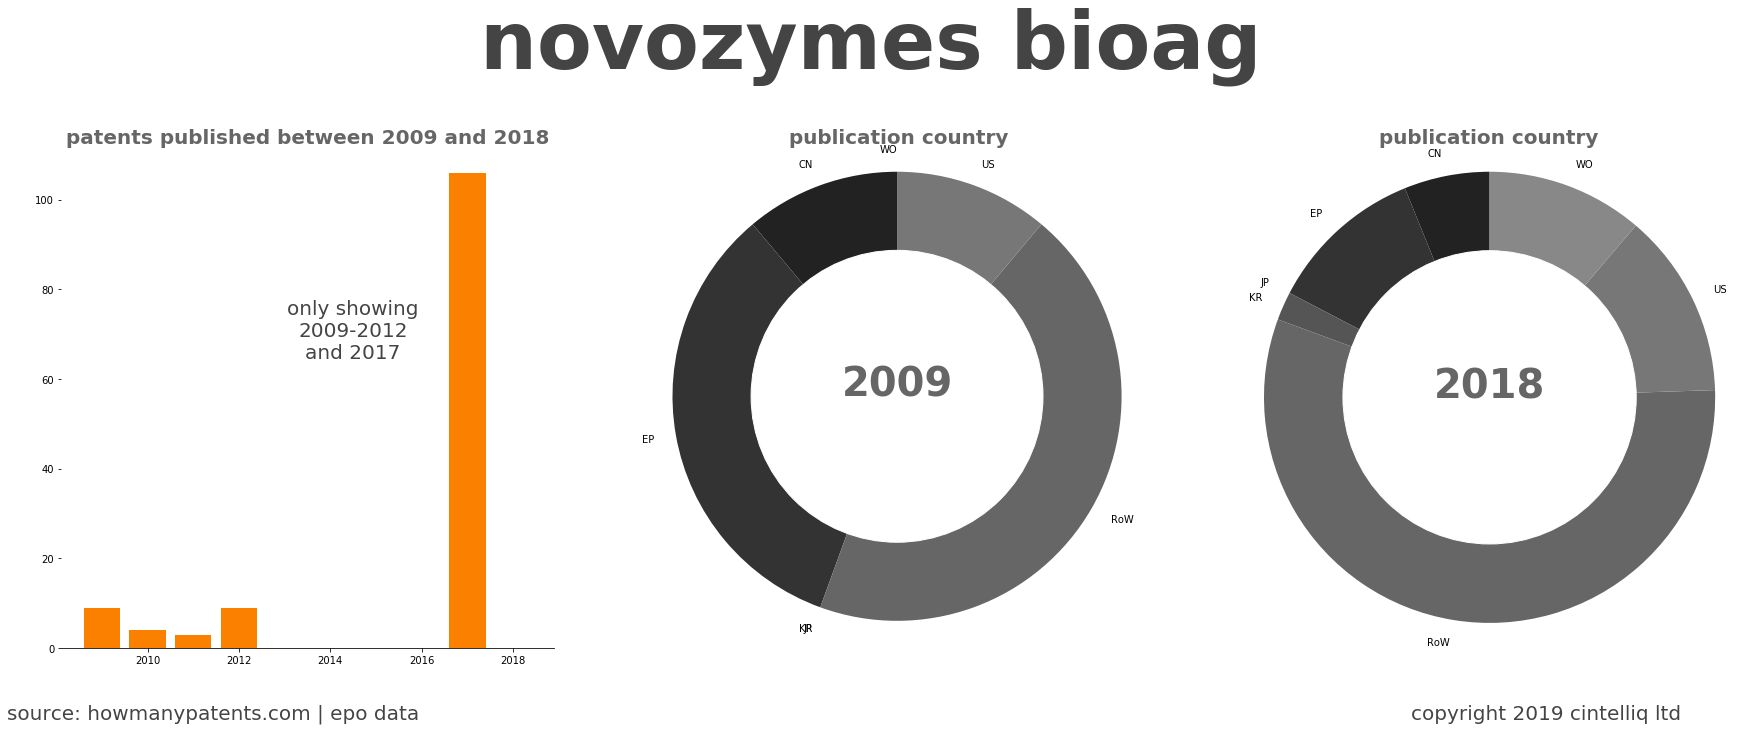 summary of patents for Novozymes Bioag